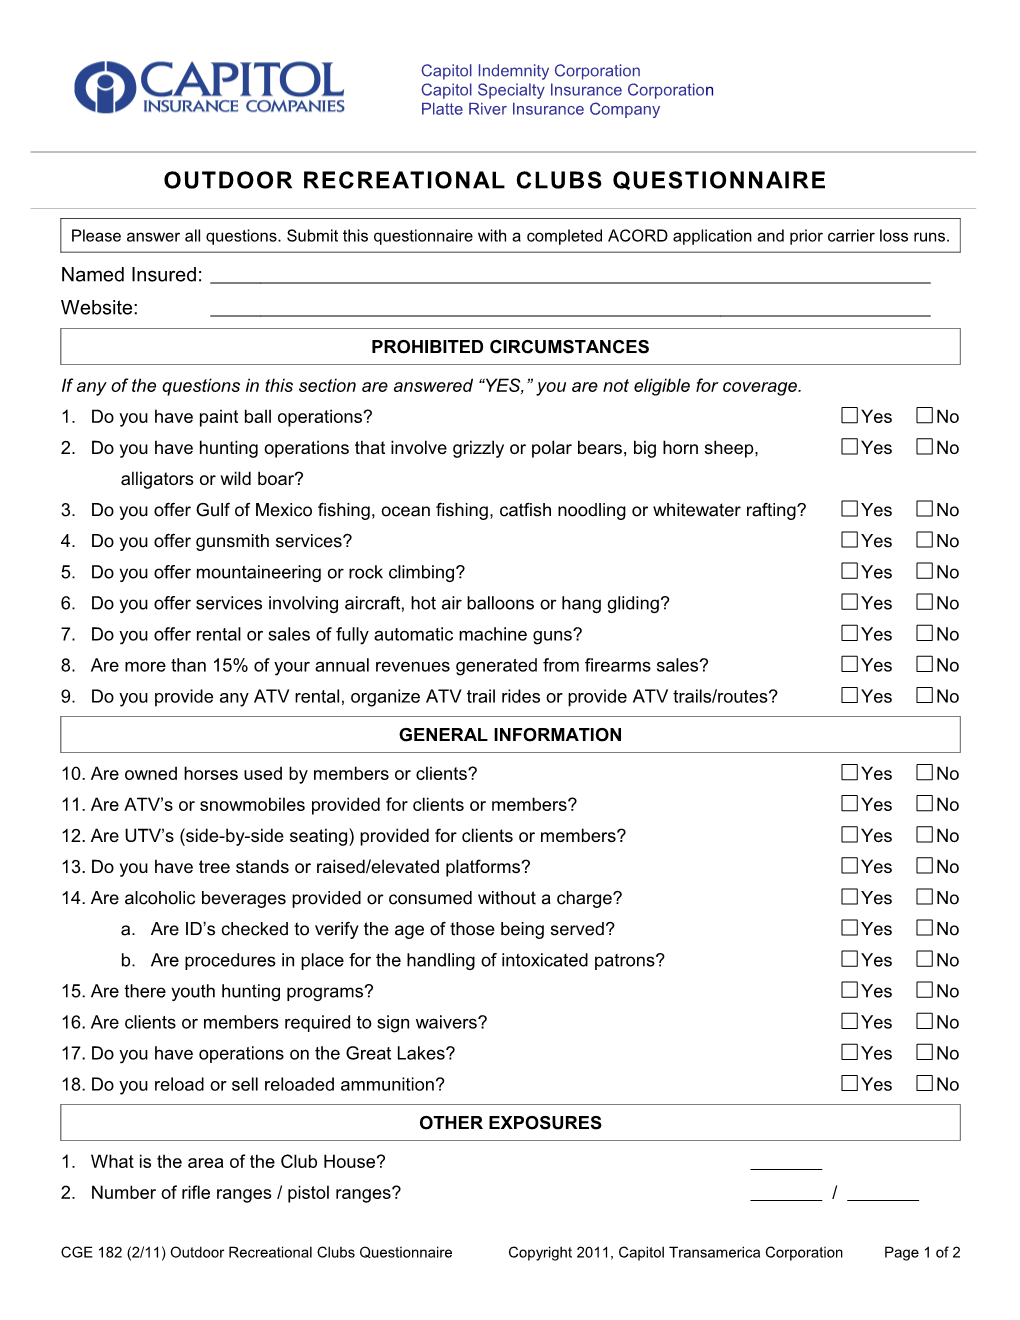 Questionnaire - Health and Exercise Clubs